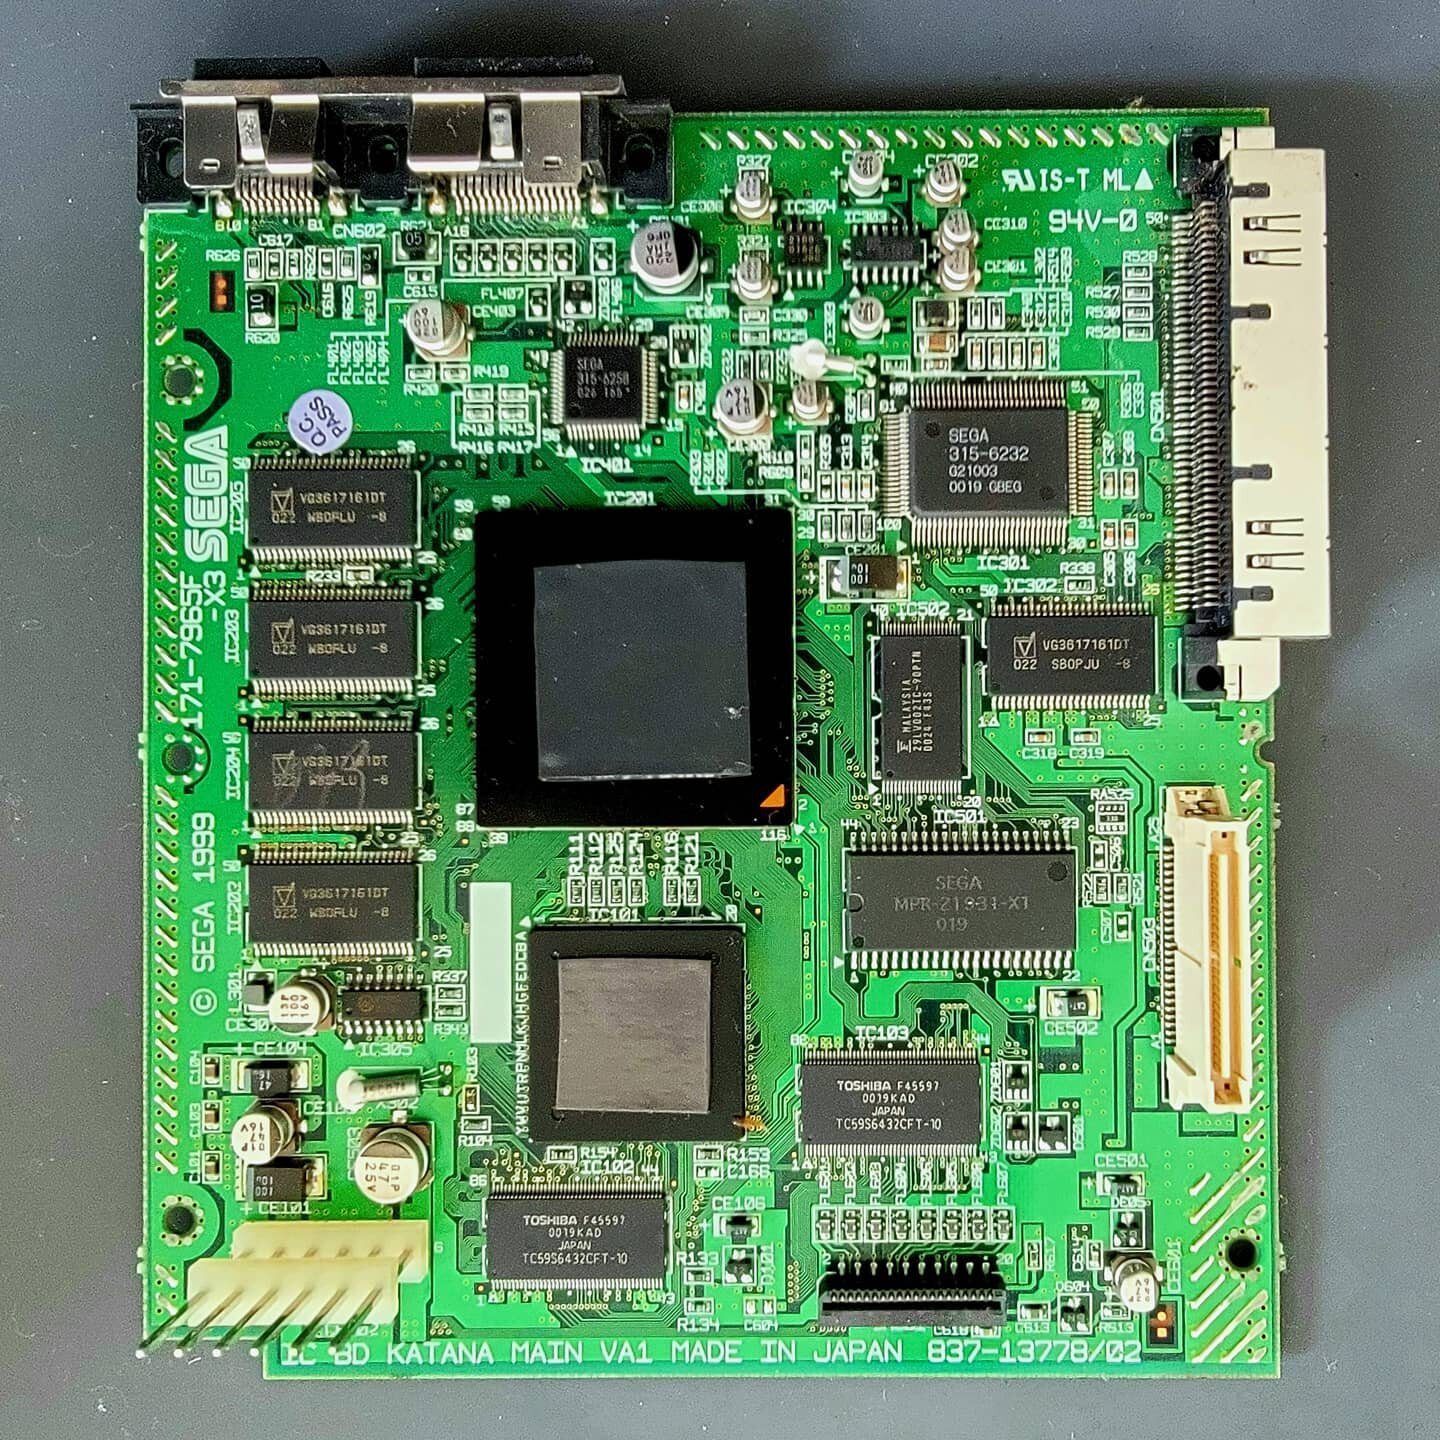 Dreamcast motherboard, controllers and memory units